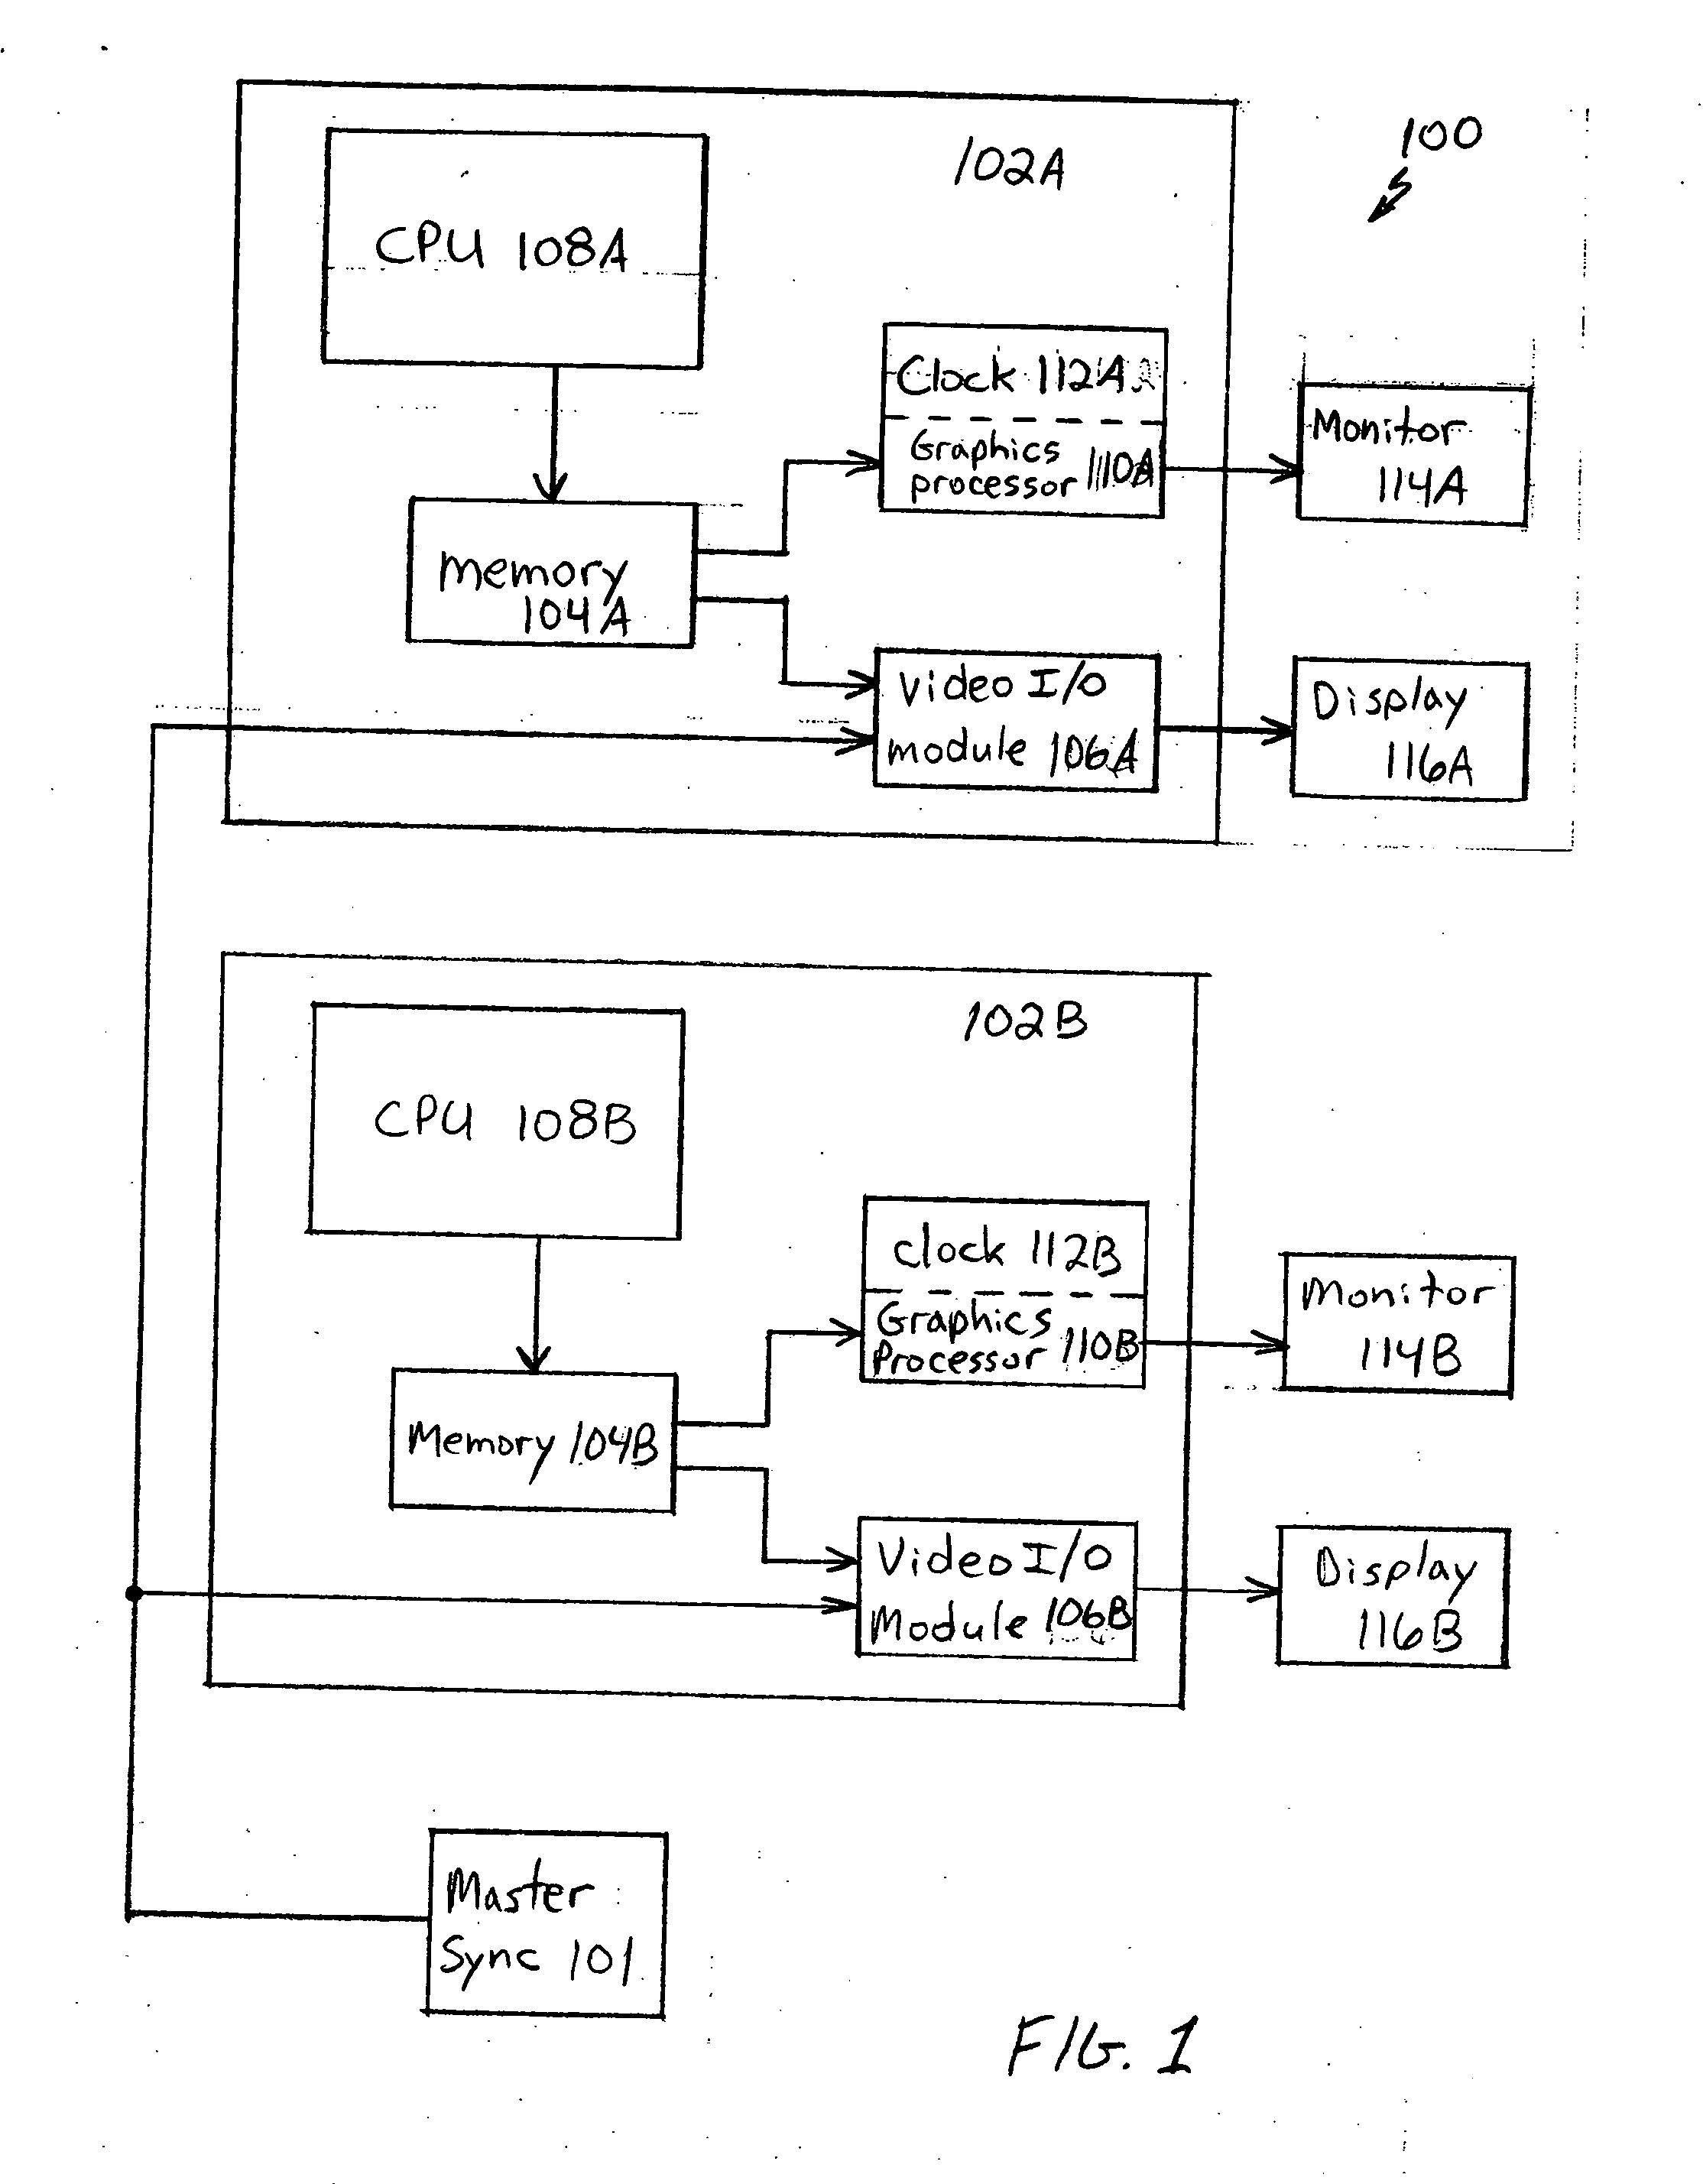 System for synchronizing display of images in a multi-display computer system